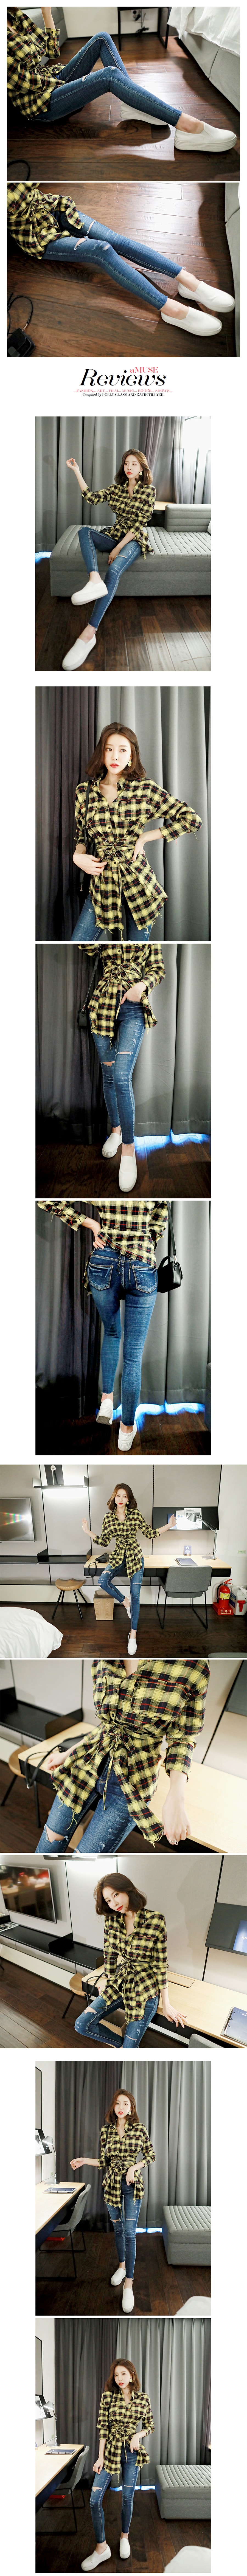 KOREA Distressed Cropped Skinny Jeans #Dark Blue S(25-26) [Free Shipping]